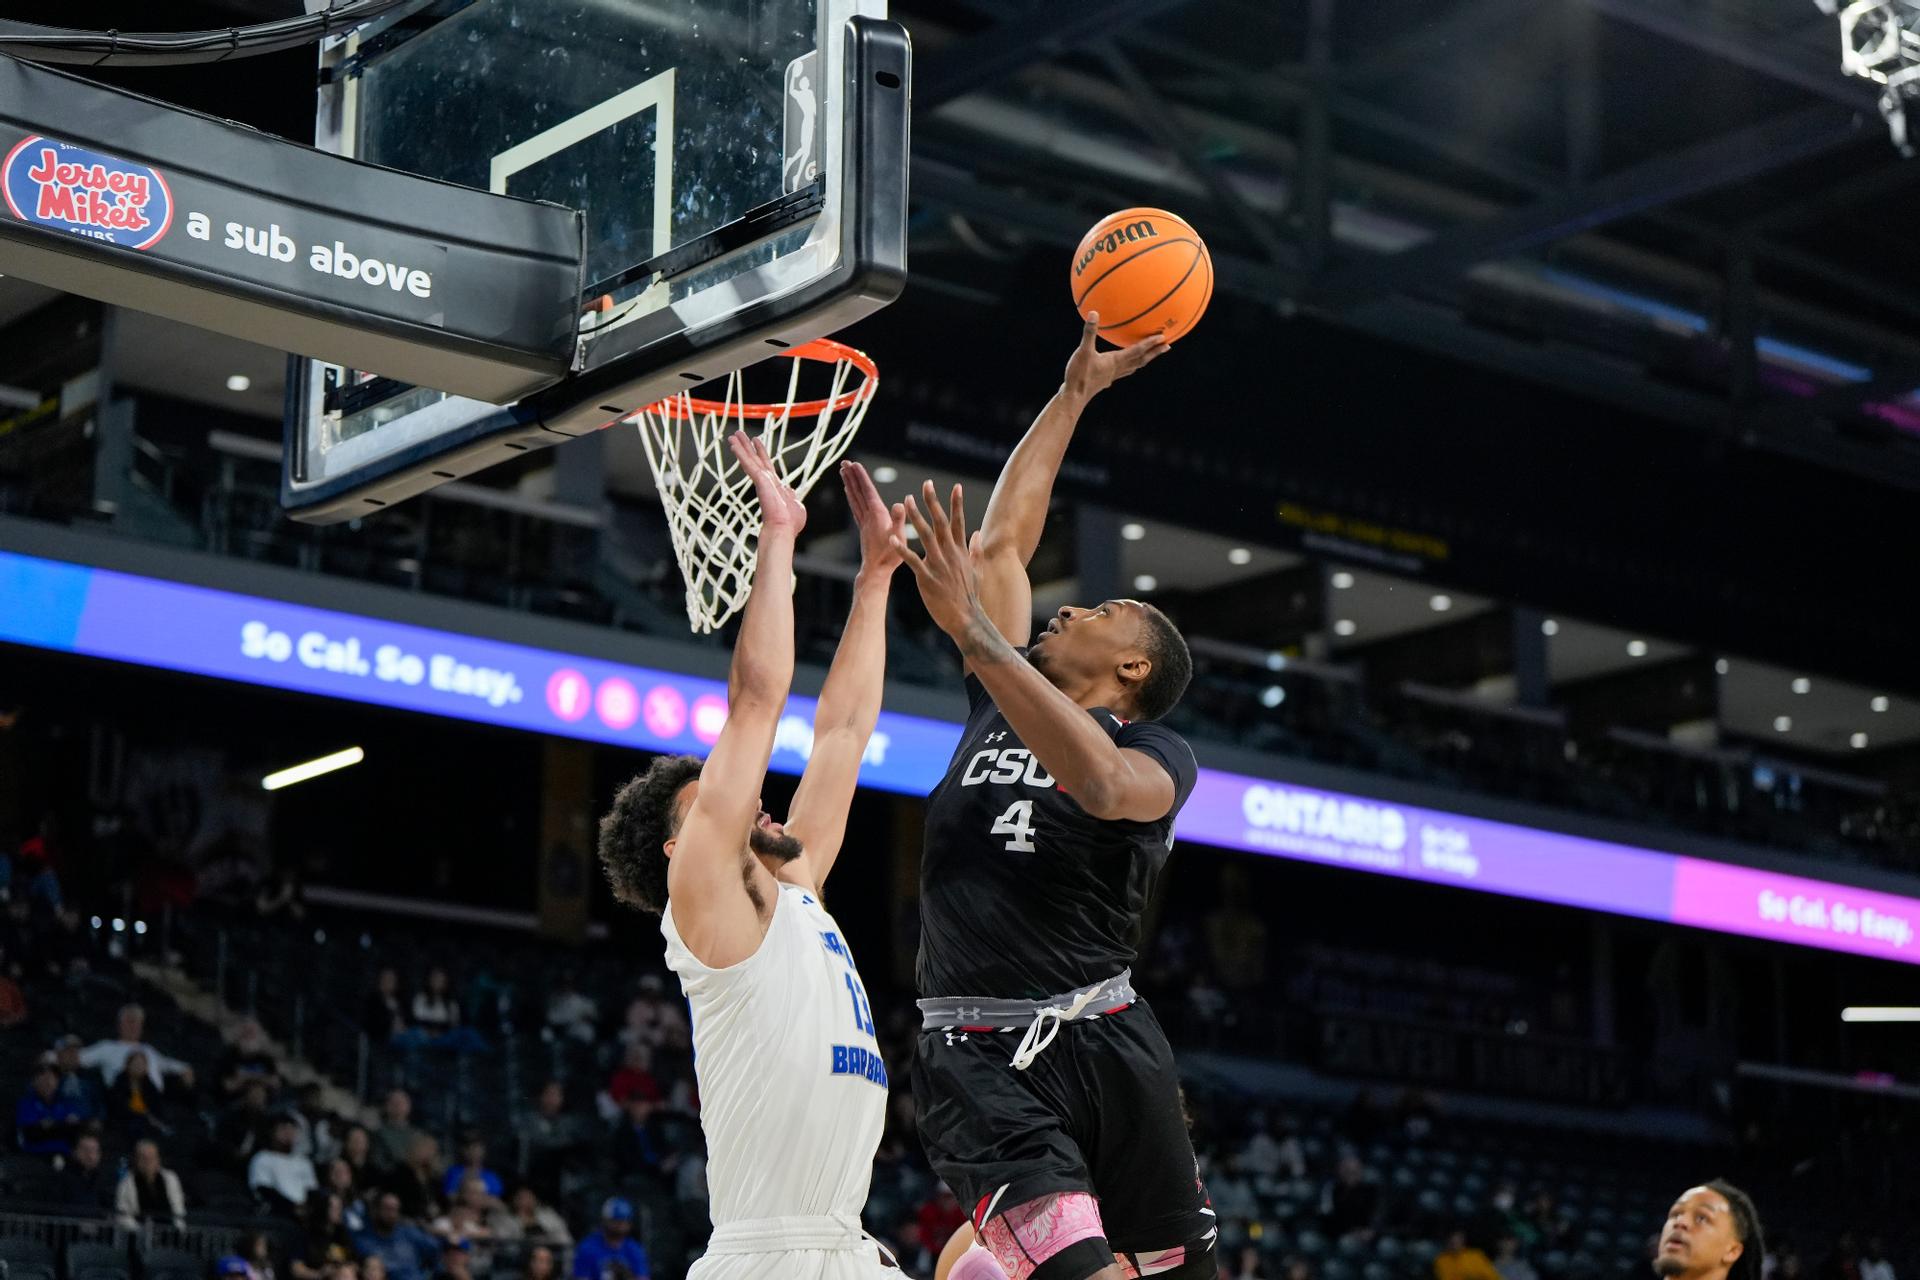 Men's basketball forward Keonte Jones skies over a UCSB player at the basket.